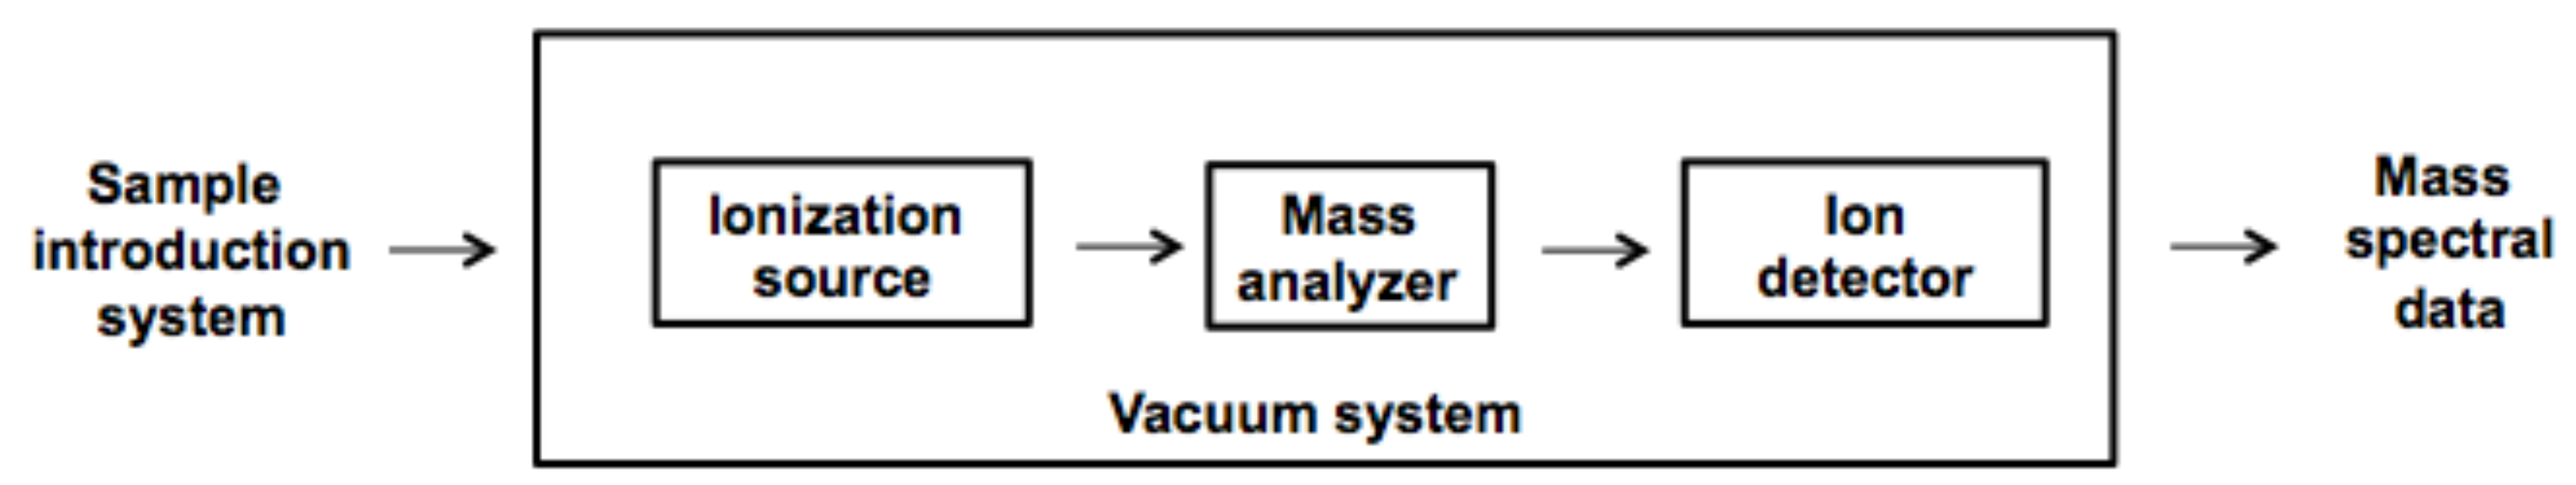 Mass spectrometer system.png